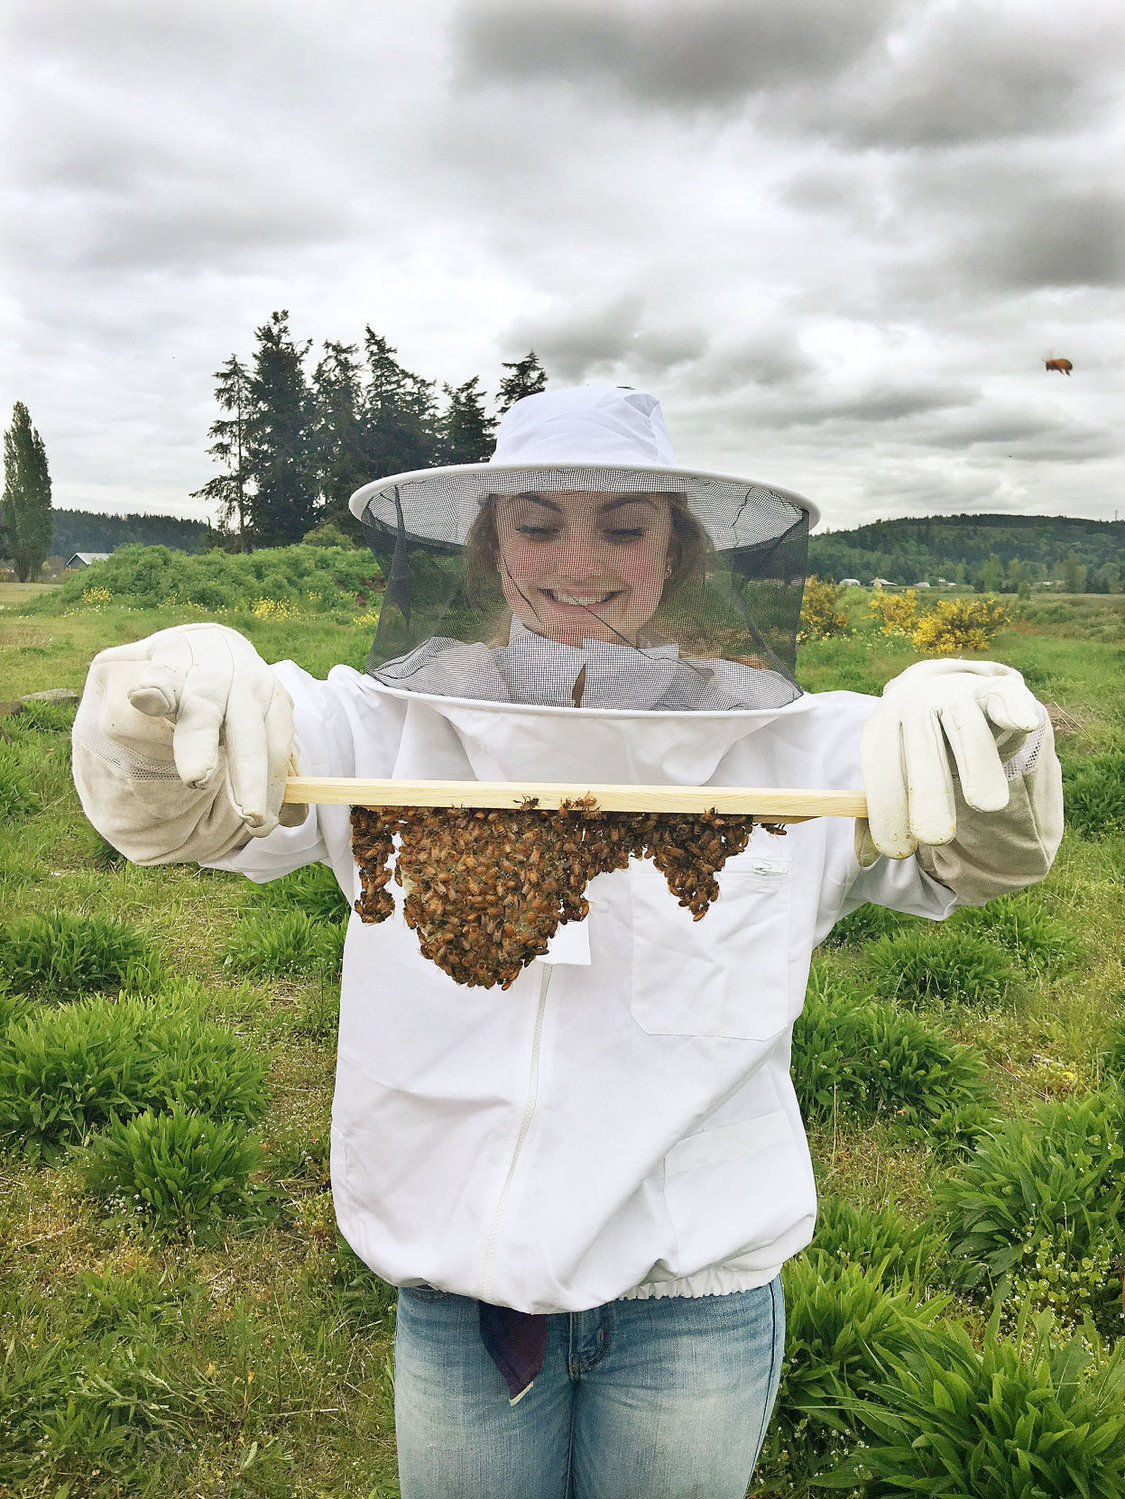 Student Rachel Smith wears a protective bee suit while holding some honeycomb. Photo courtesy Gary Coyan